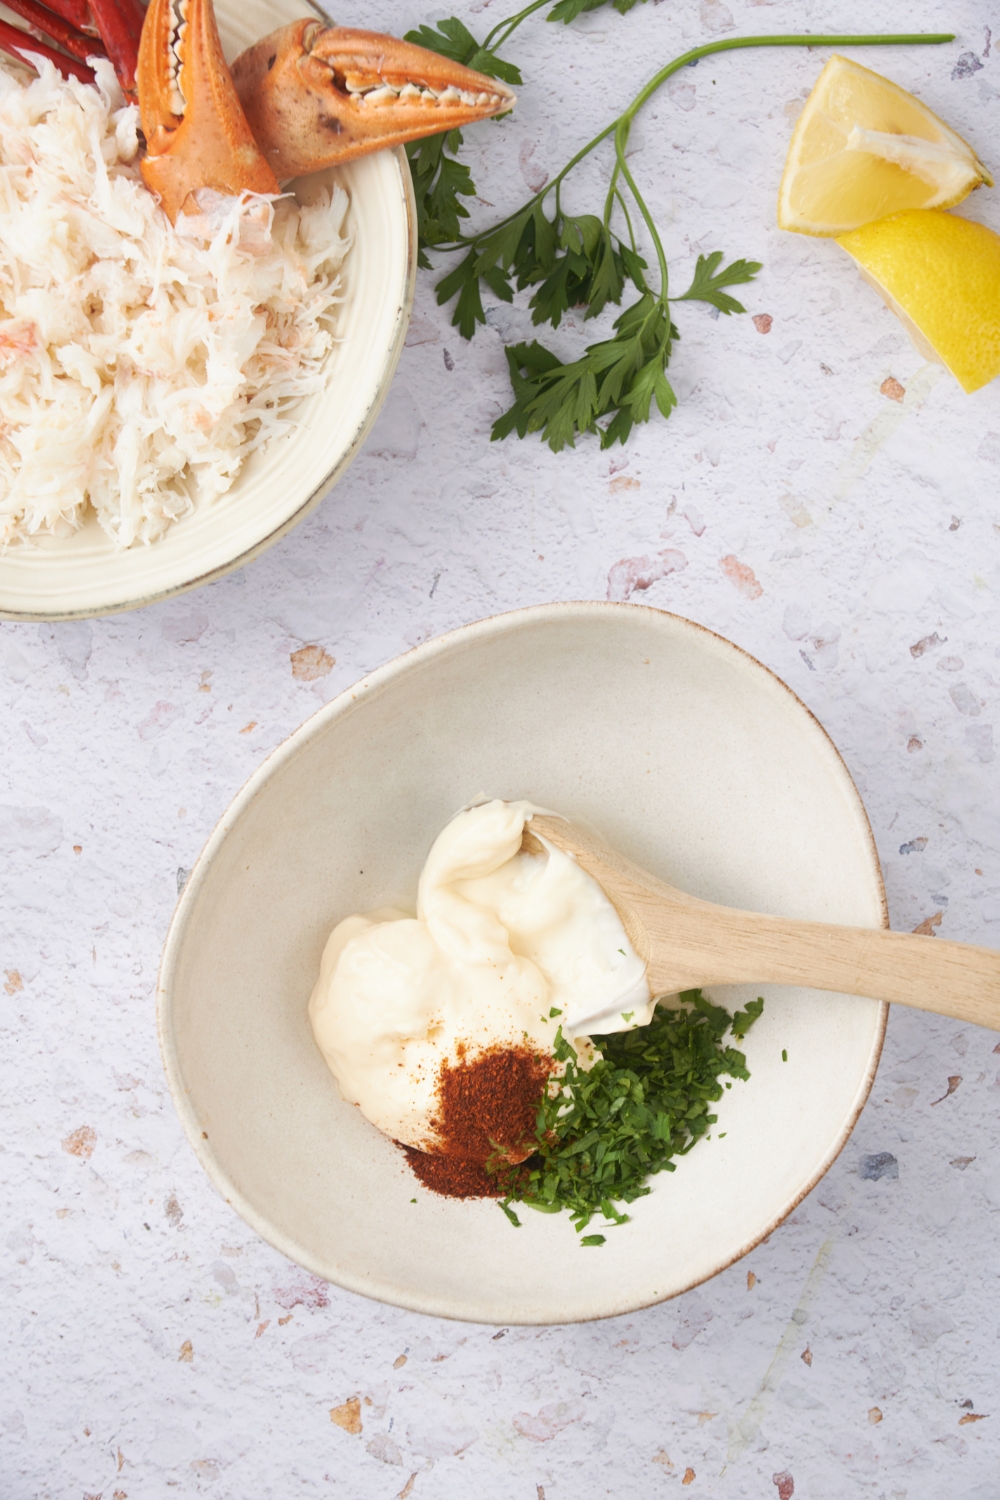 A bowl filled with mayonnaise, spices, and fresh herbs. There is a wooden spoon in the bowl.